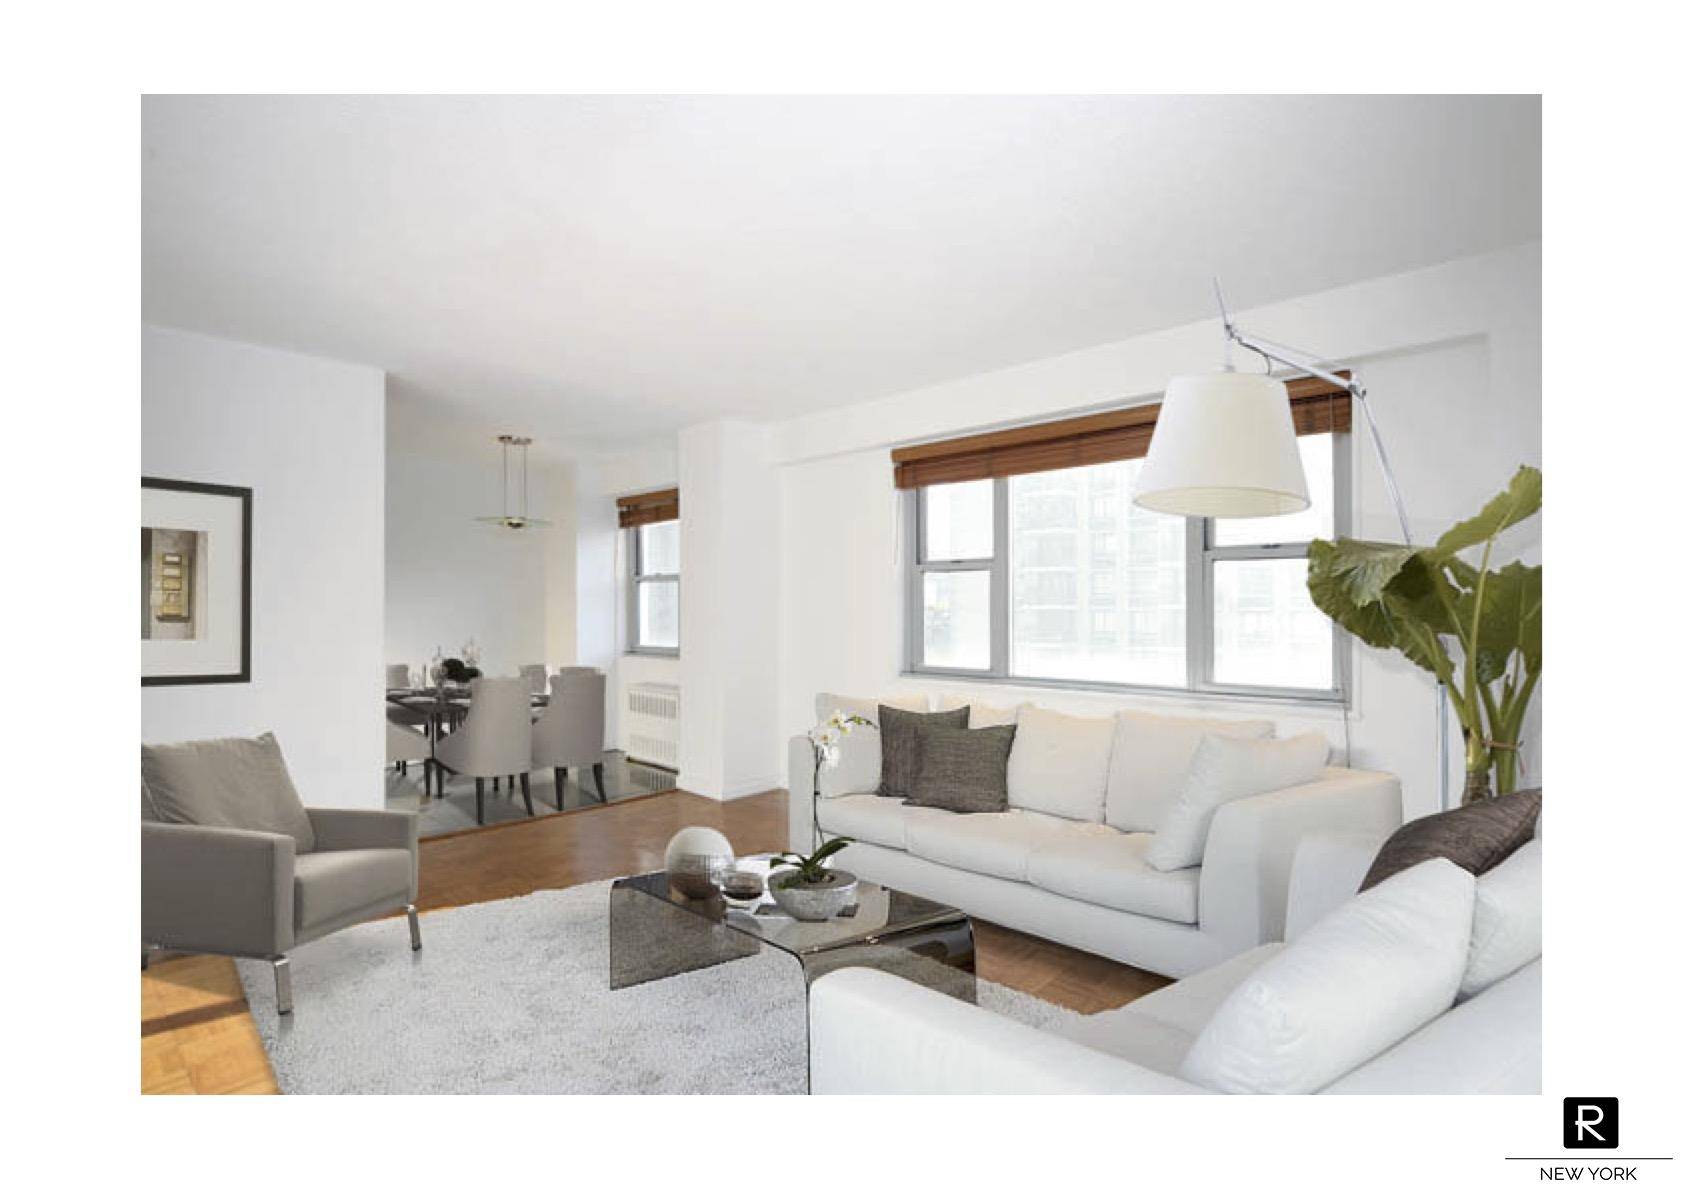 100 West Condominium is located at the corner of Columbus Avenue and 93rd Street, a few steps away from Central Park.